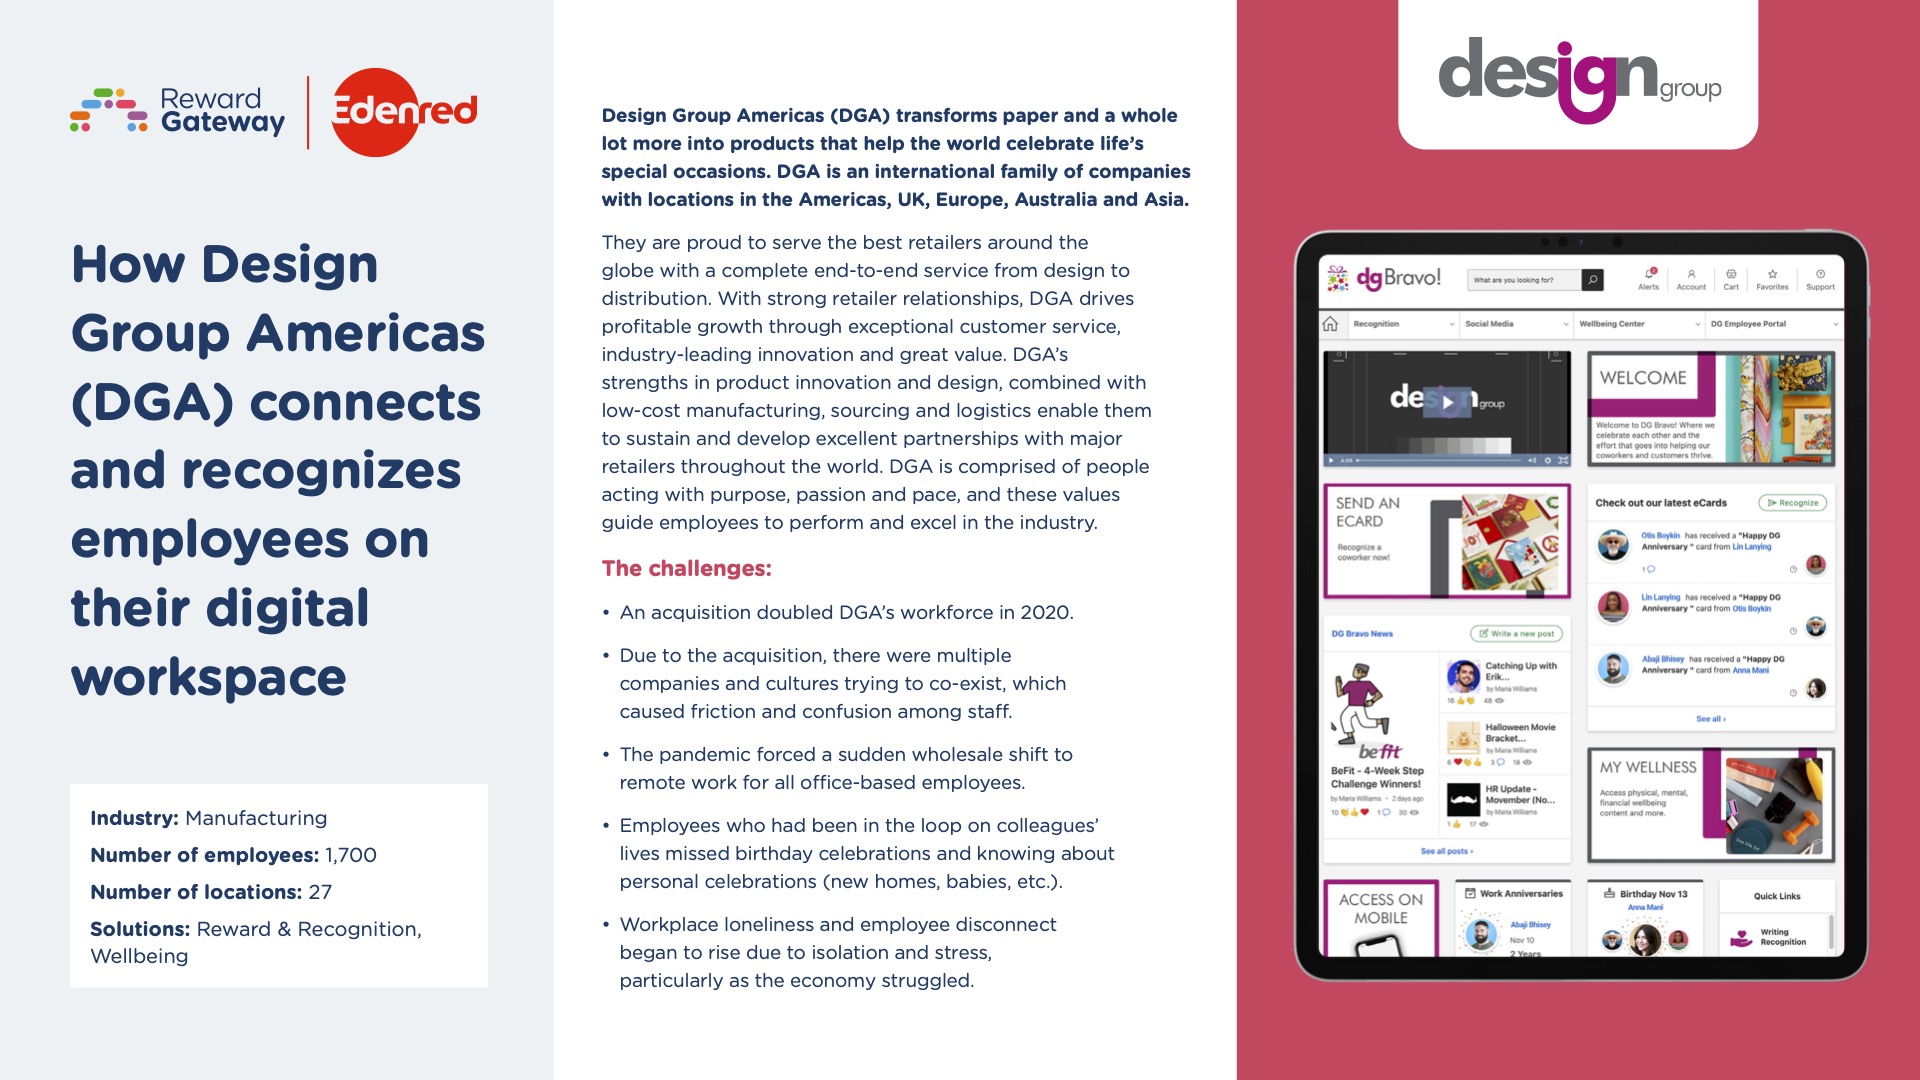 How Design Group Americas (DGA) connects and recognizes employees on their digital workspace